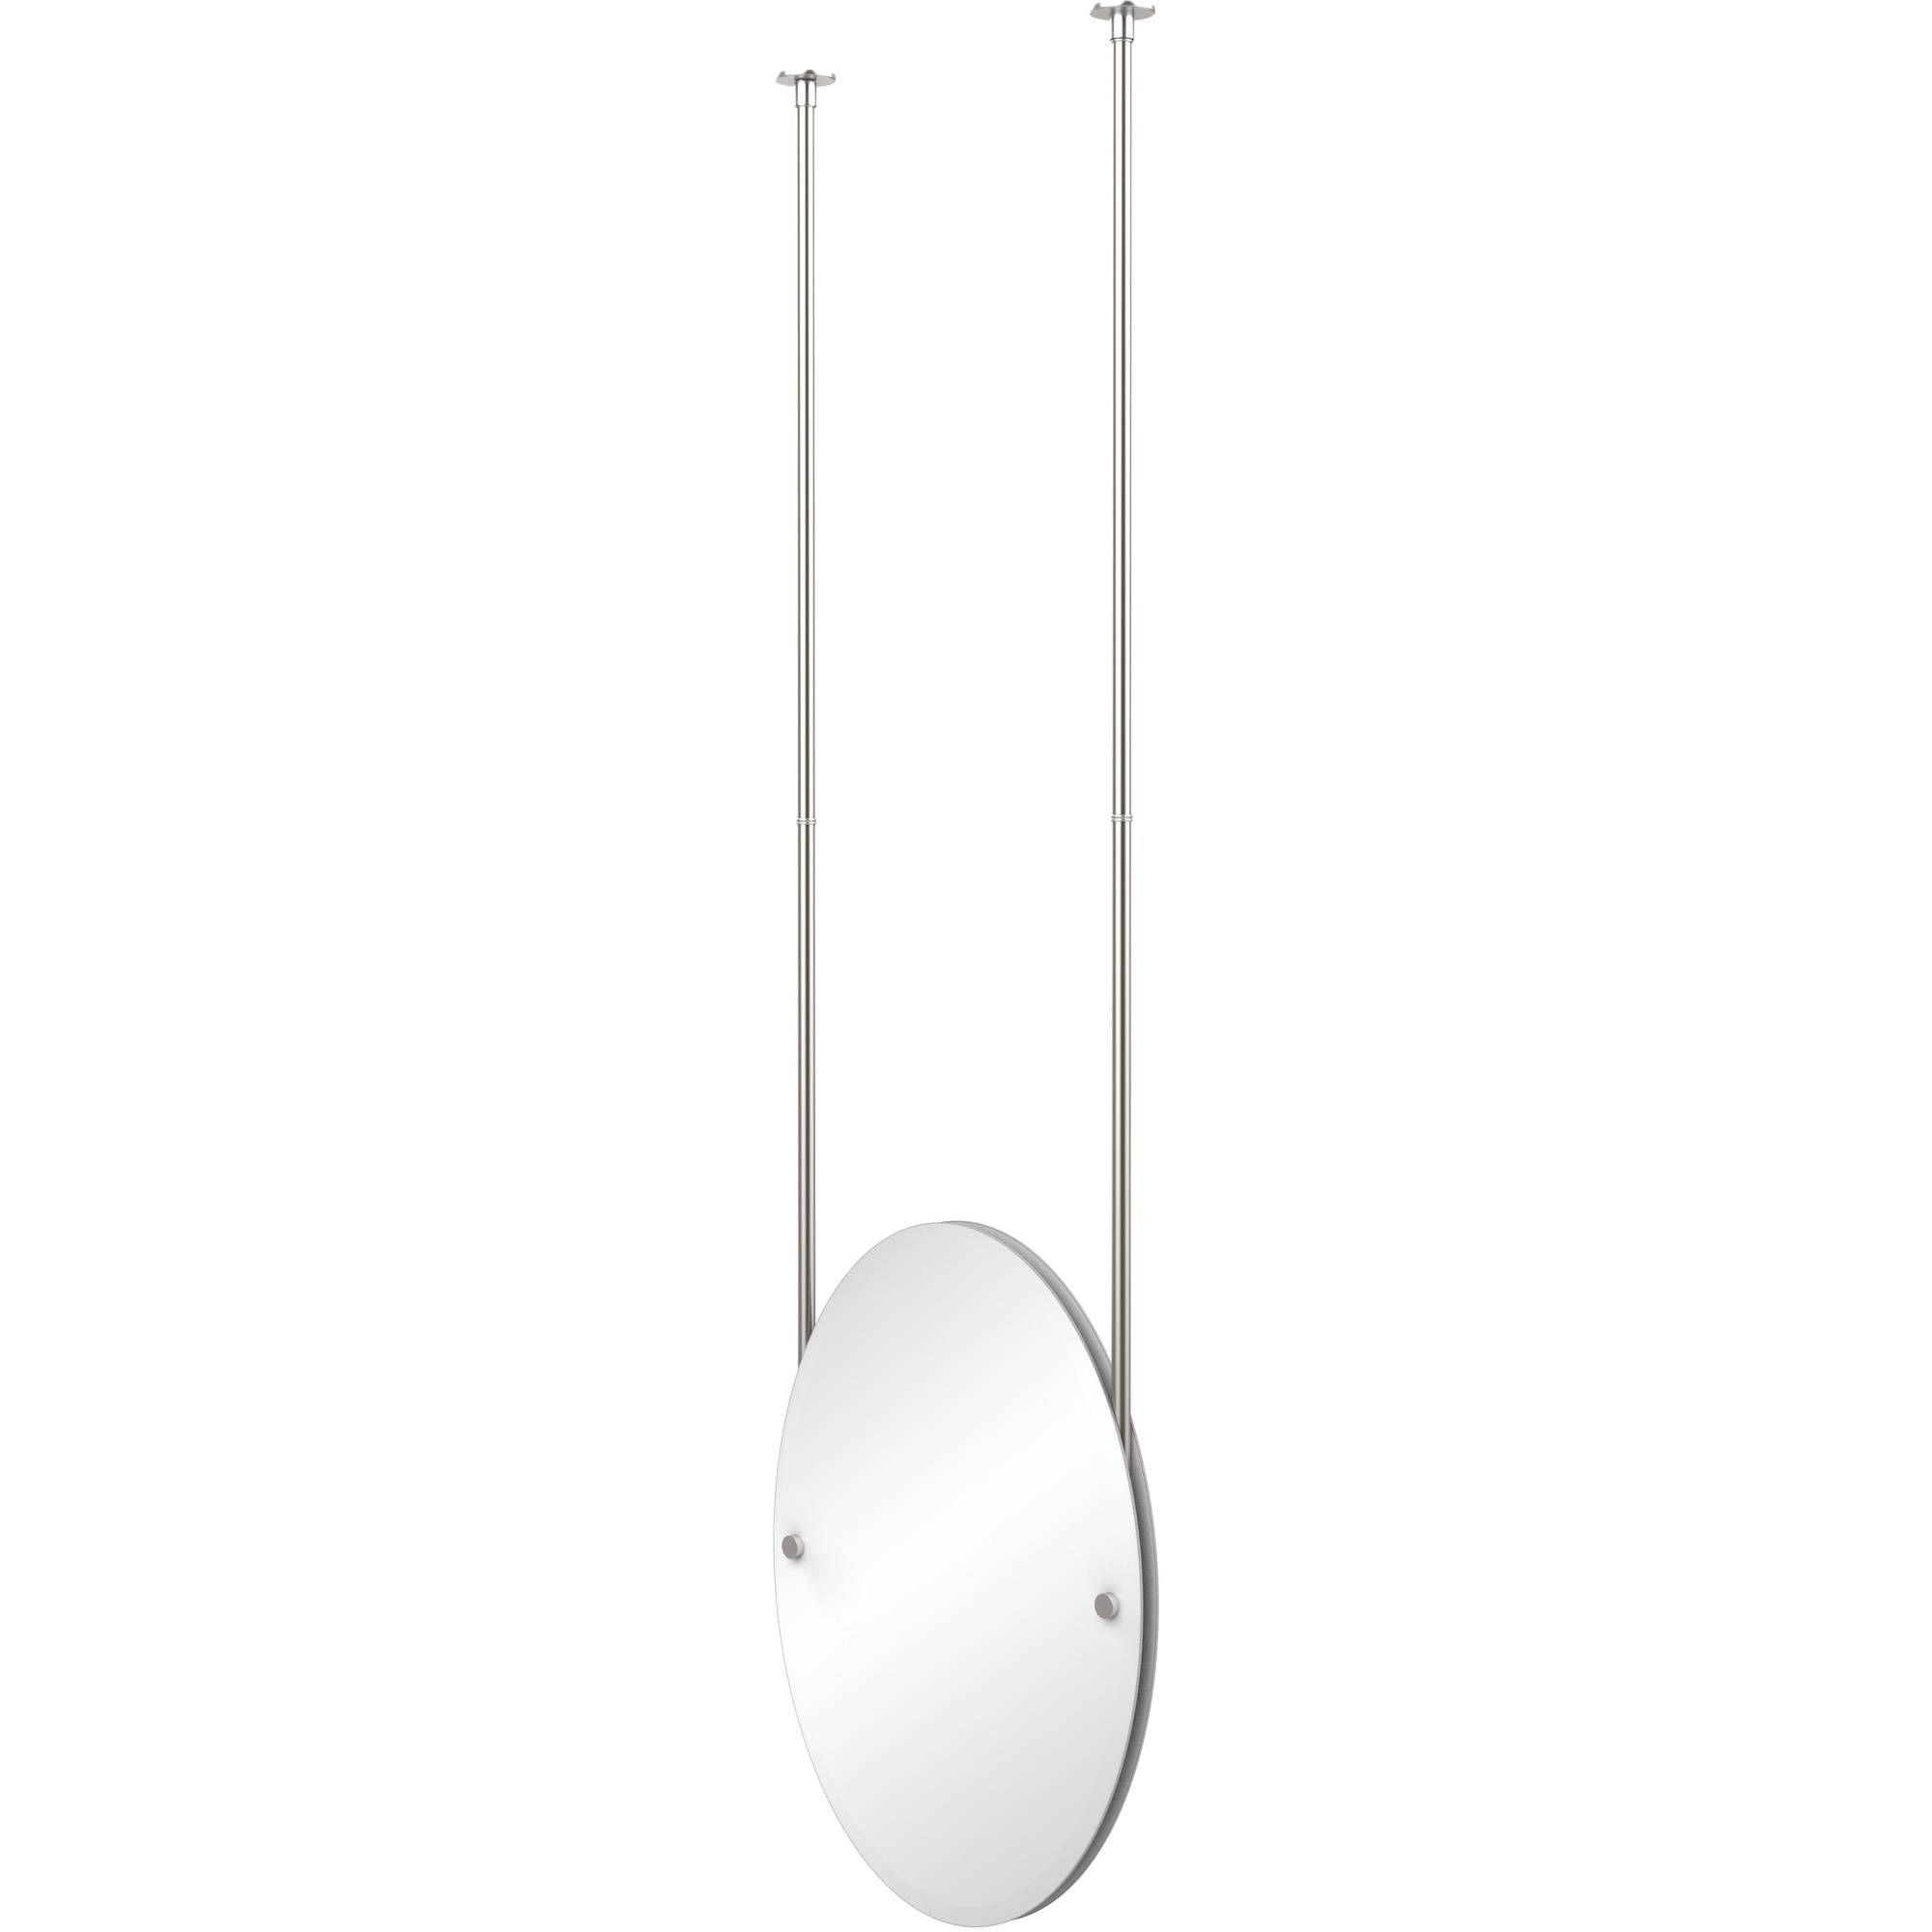 Frameless Oval Ceiling Hung Mirror With Beveled Edge In Satin Nickel Within 2021 Ceiling Hung Satin Chrome Oval Mirrors (View 9 of 15)